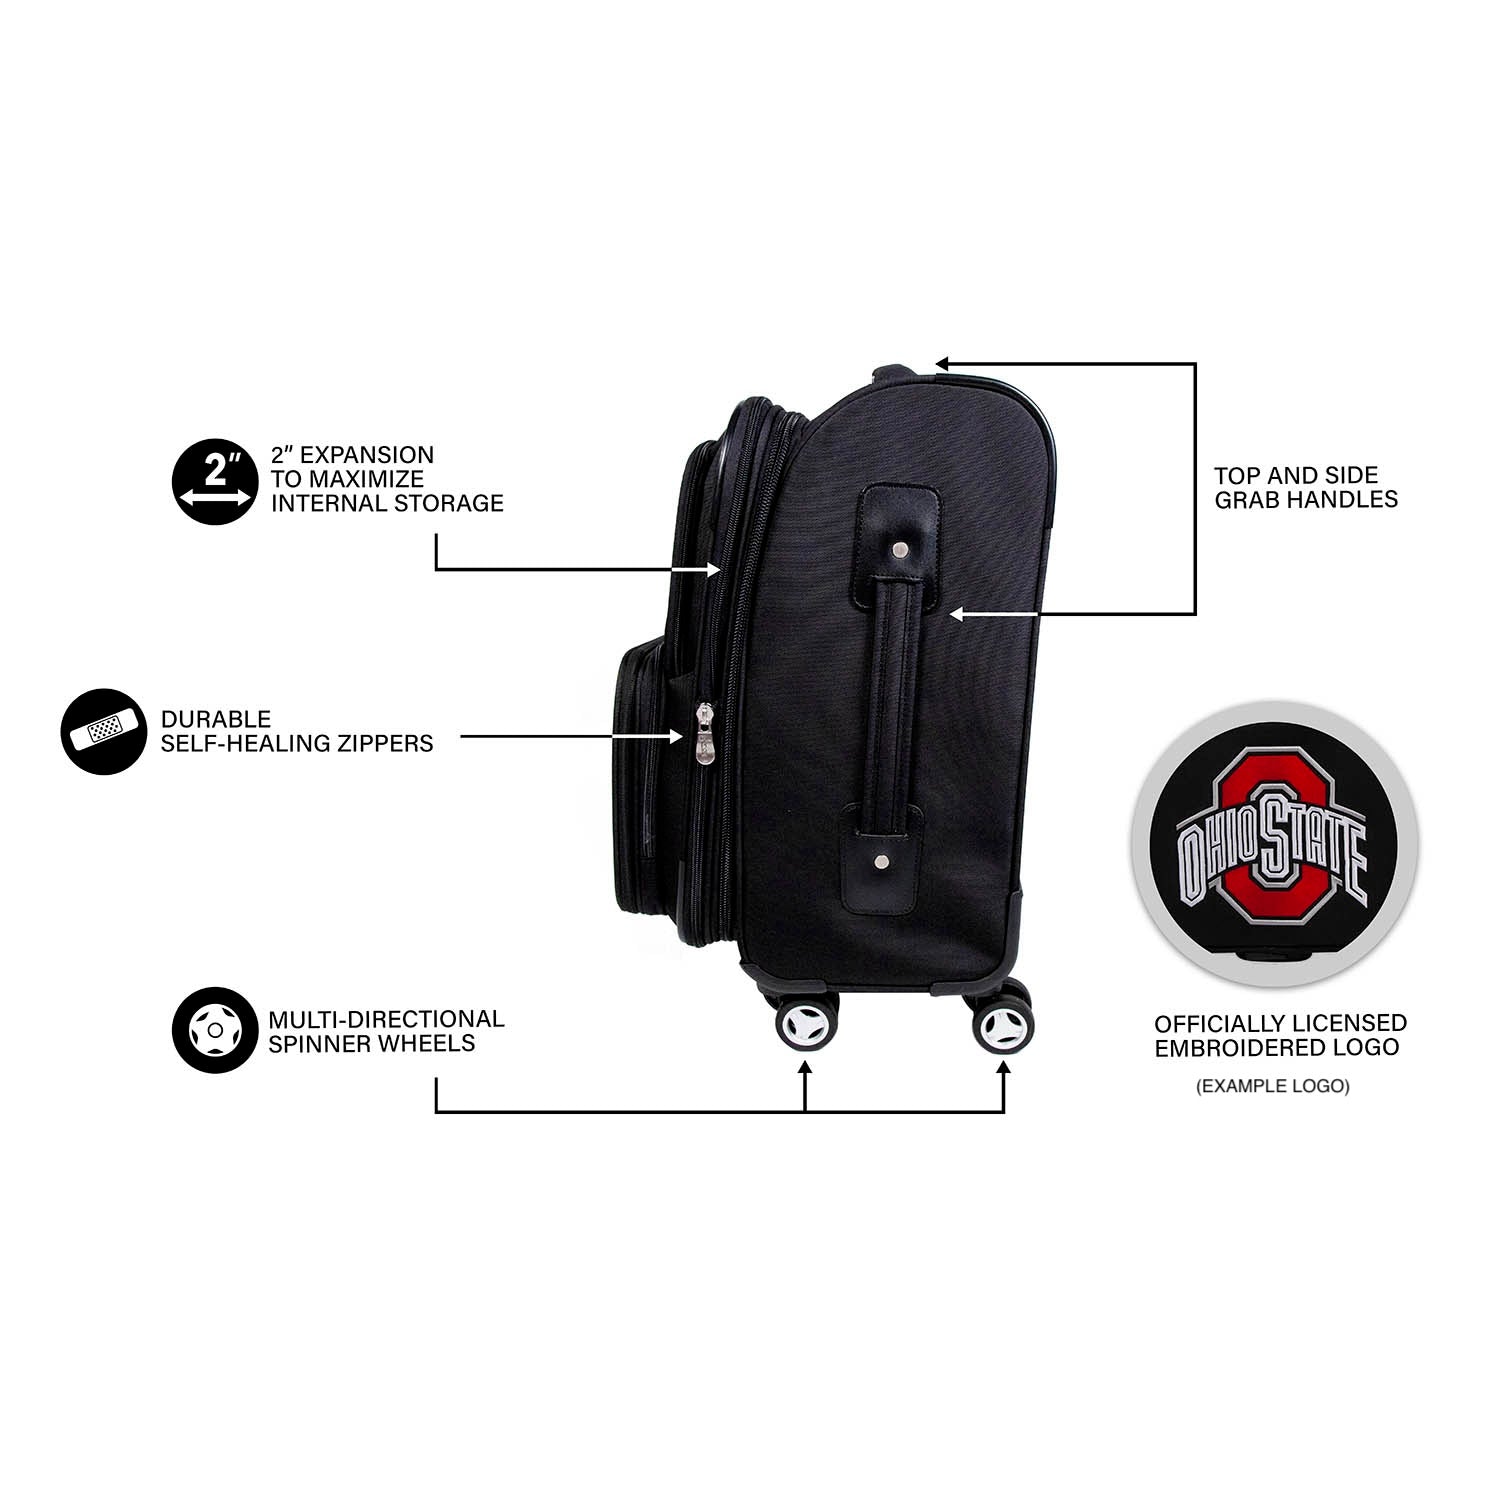 Los Angeles Angels Carry-on Spinner Softside